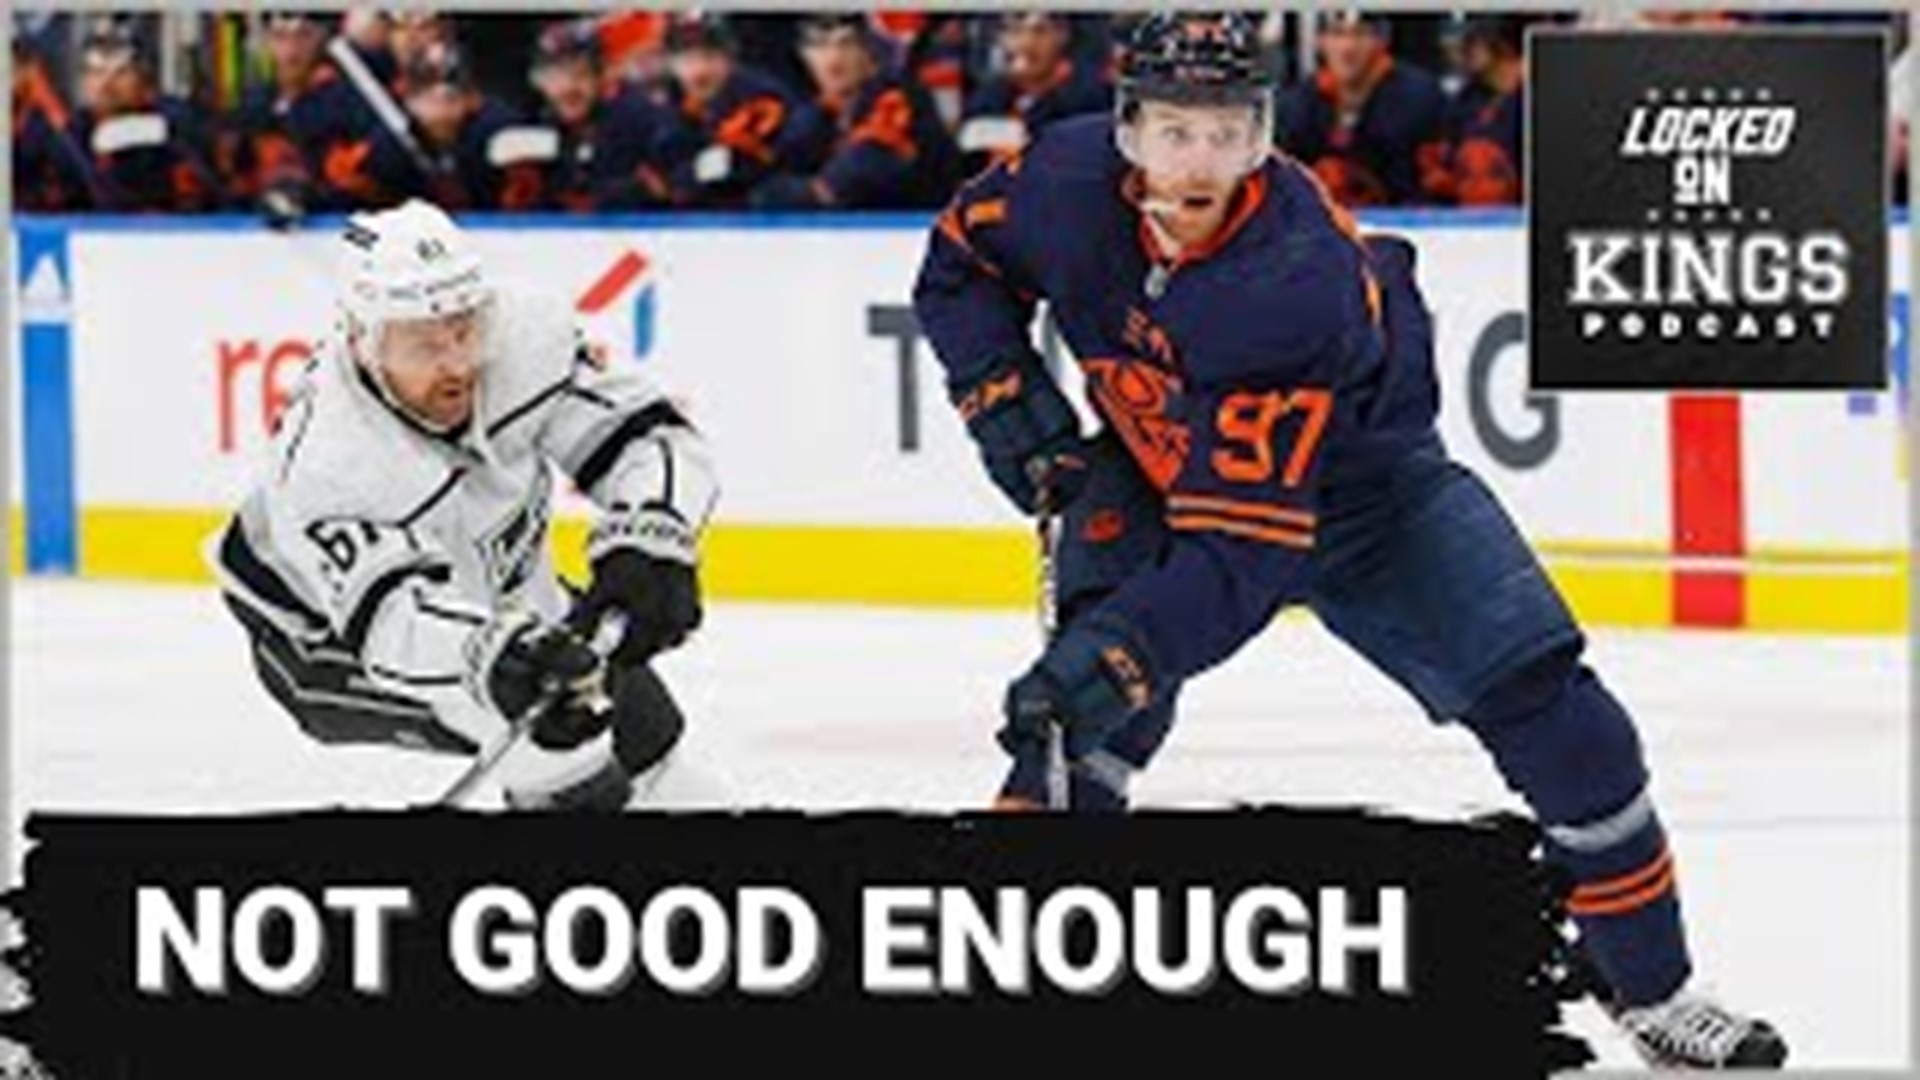 The Kings fail their final regular season test vs the Oilers (losing 4-1). We break down the game against a team LA could face in the playoffs.